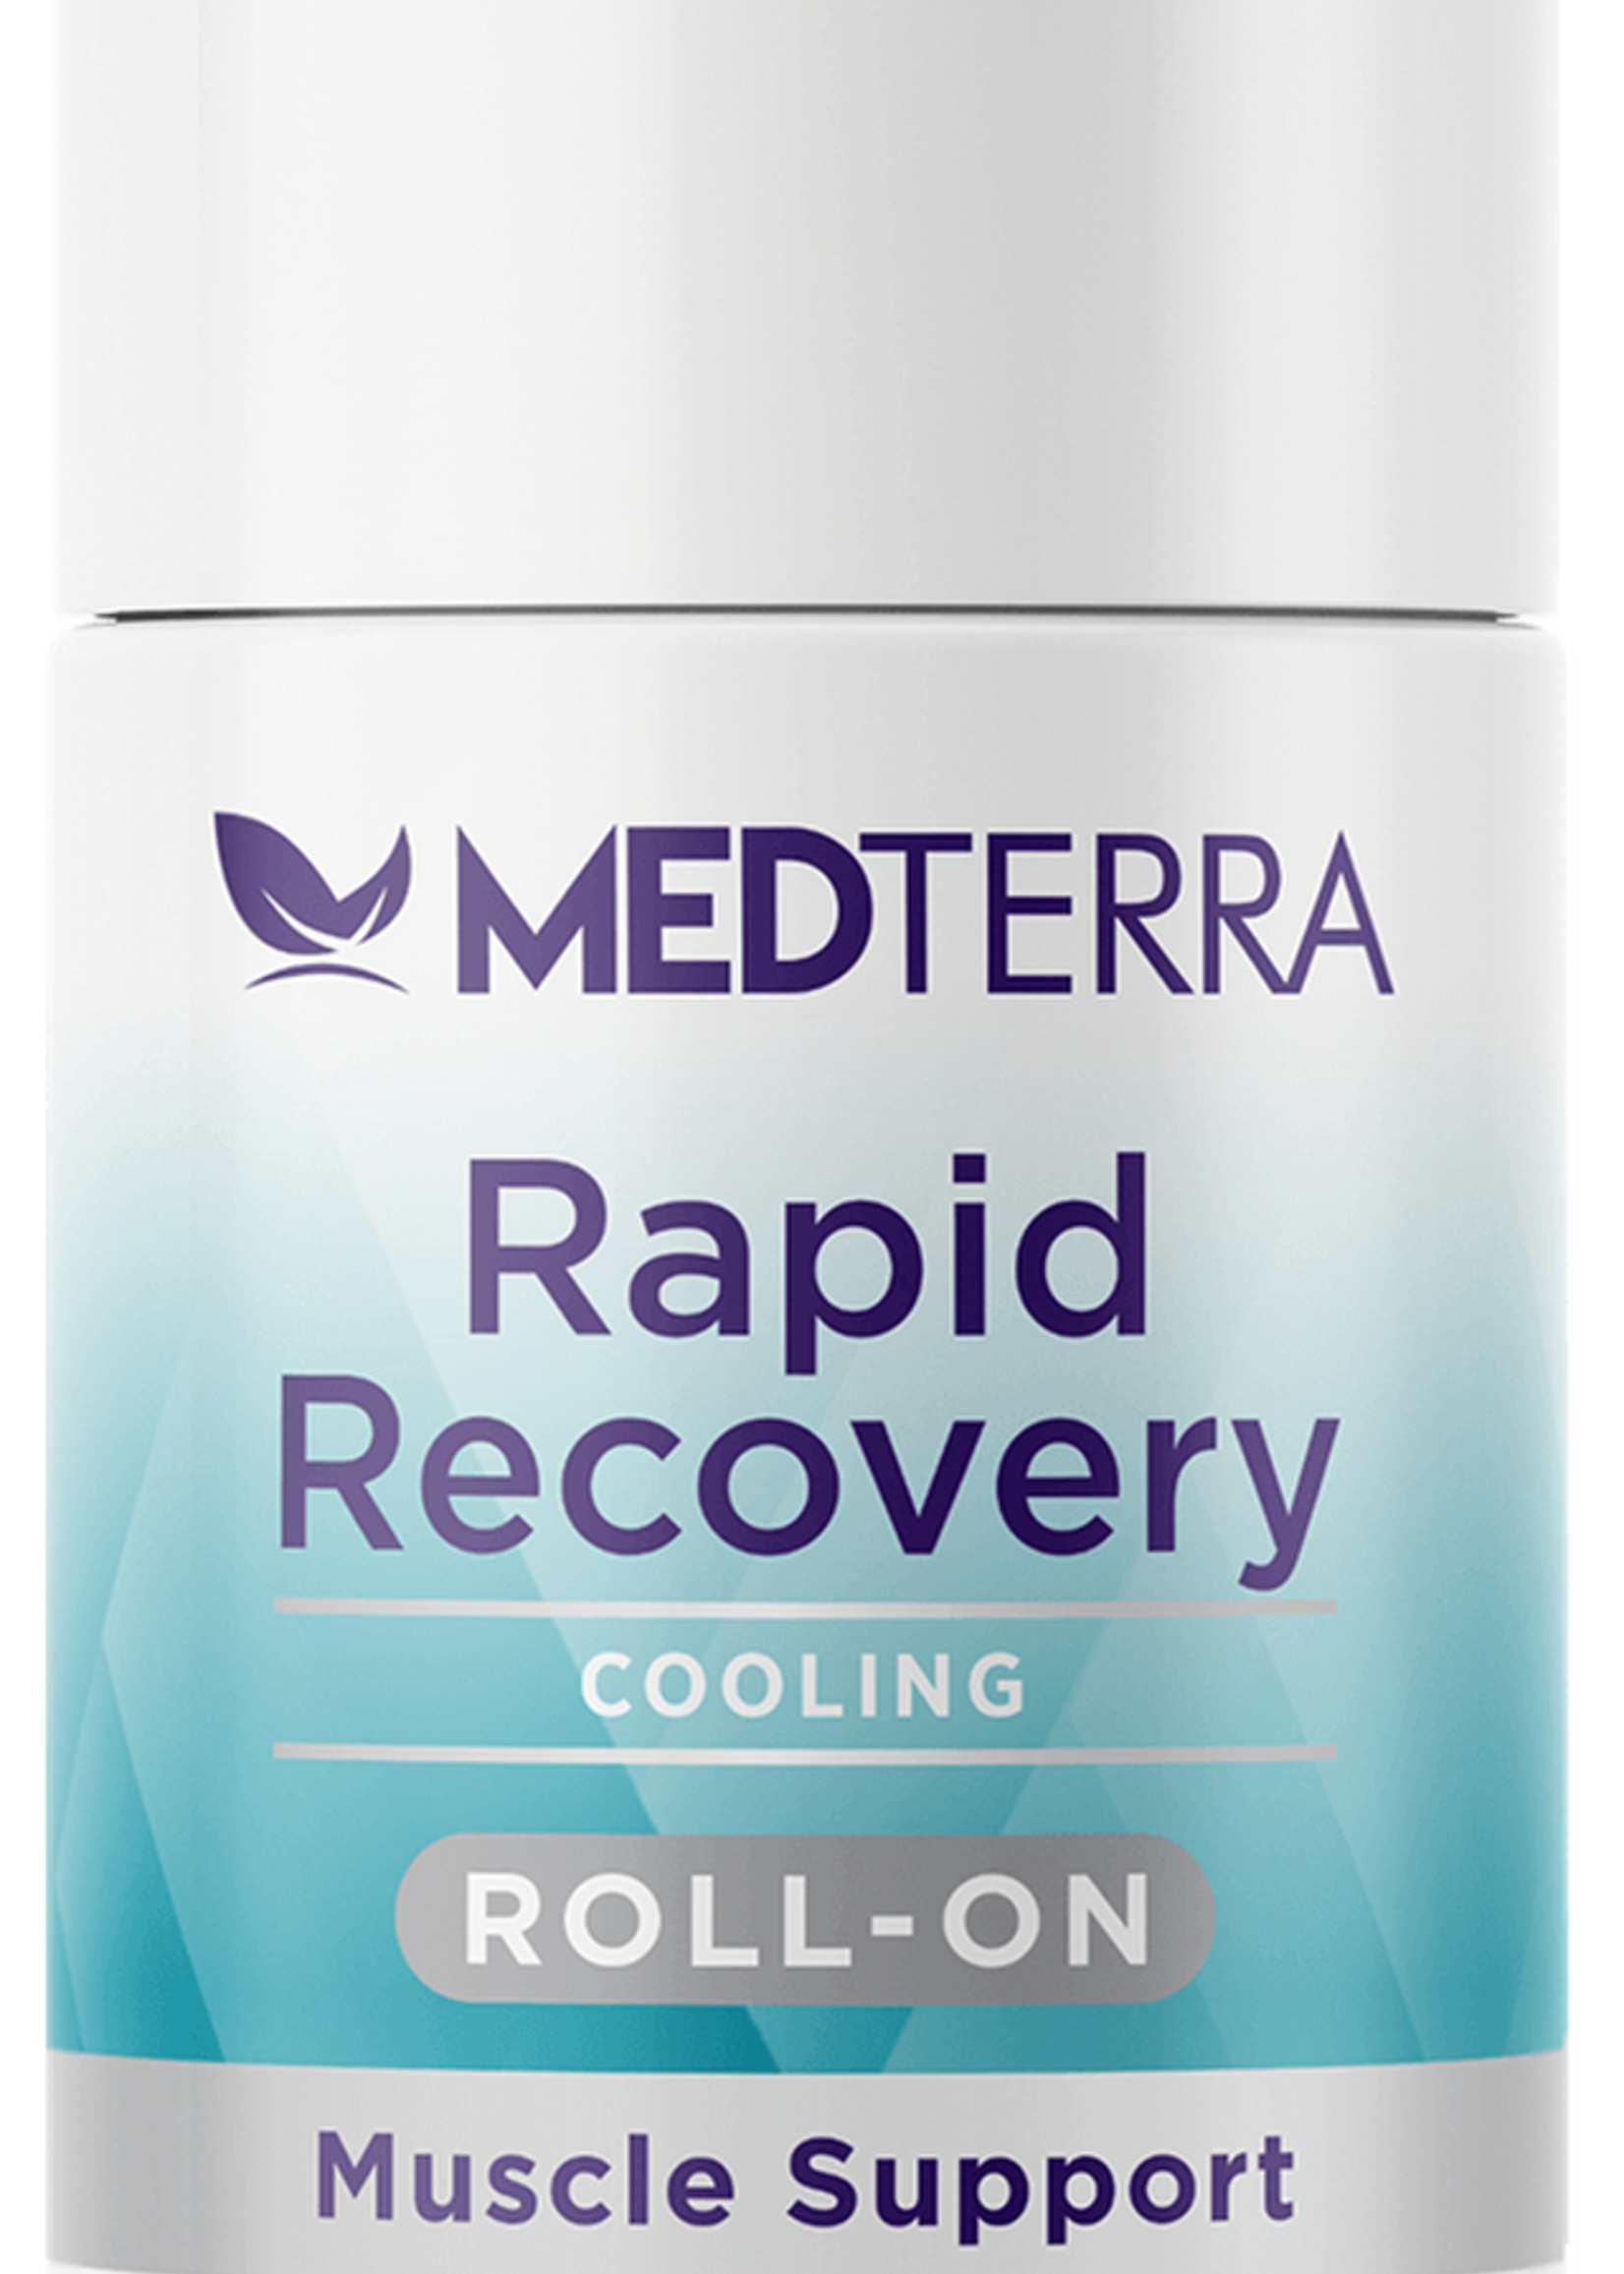 Medterra Rapid Recovery Cooling